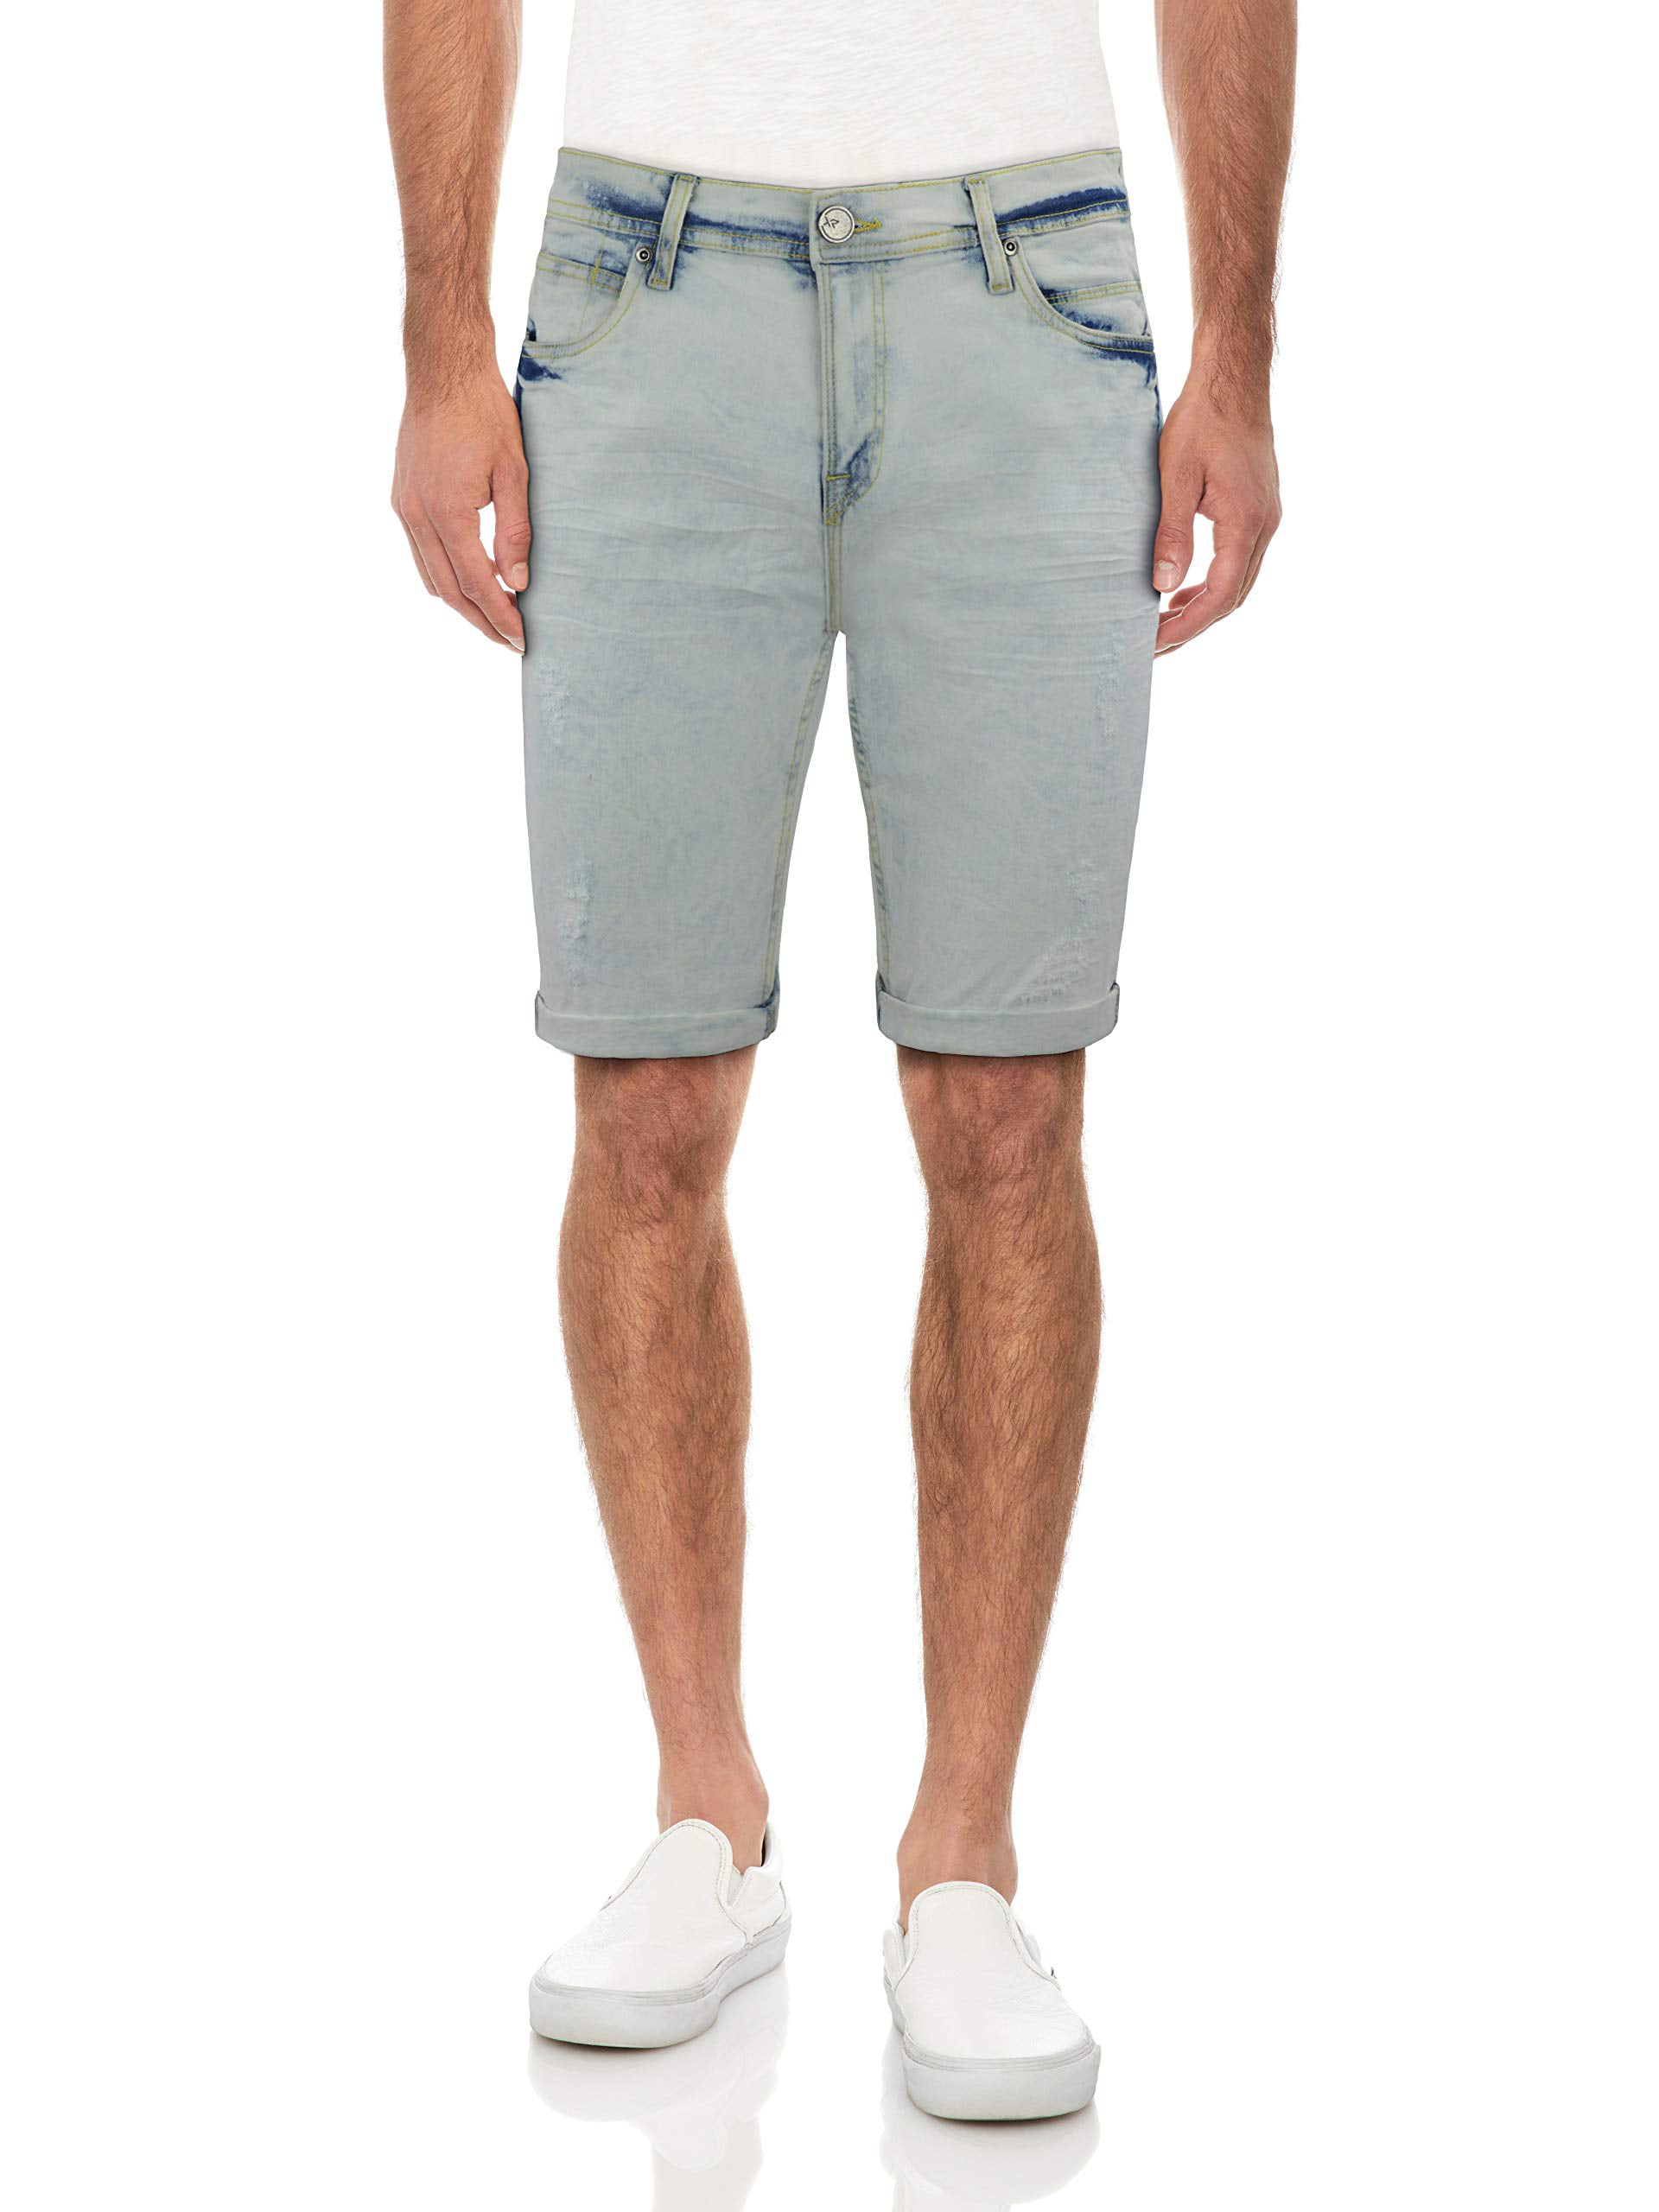 Rolled Up Cuff Bermuda Short Distressed Men's Stretch Casual Denim Shorts Slim Fit X RAY Slim Jean Shorts for Men 